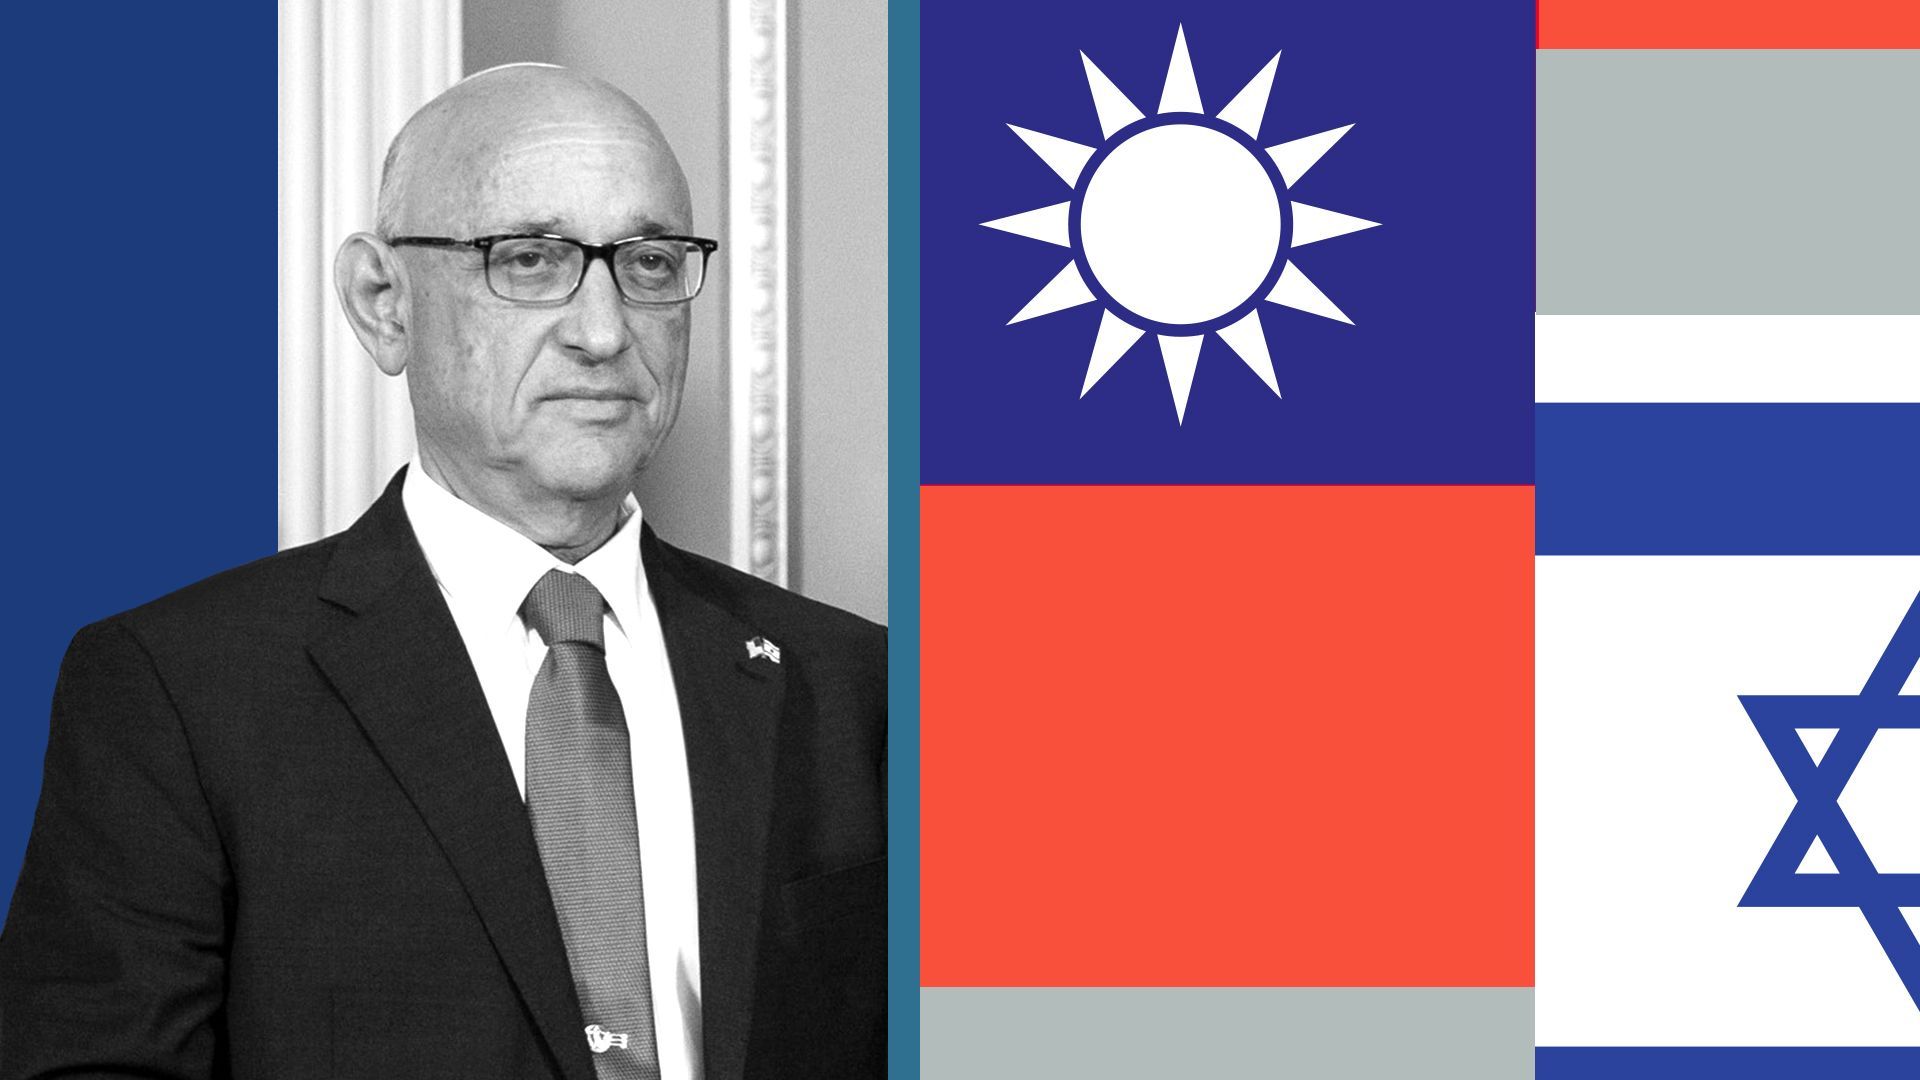 Photo illustration of Jacob Nagel with the Israel and Taiwan flags.